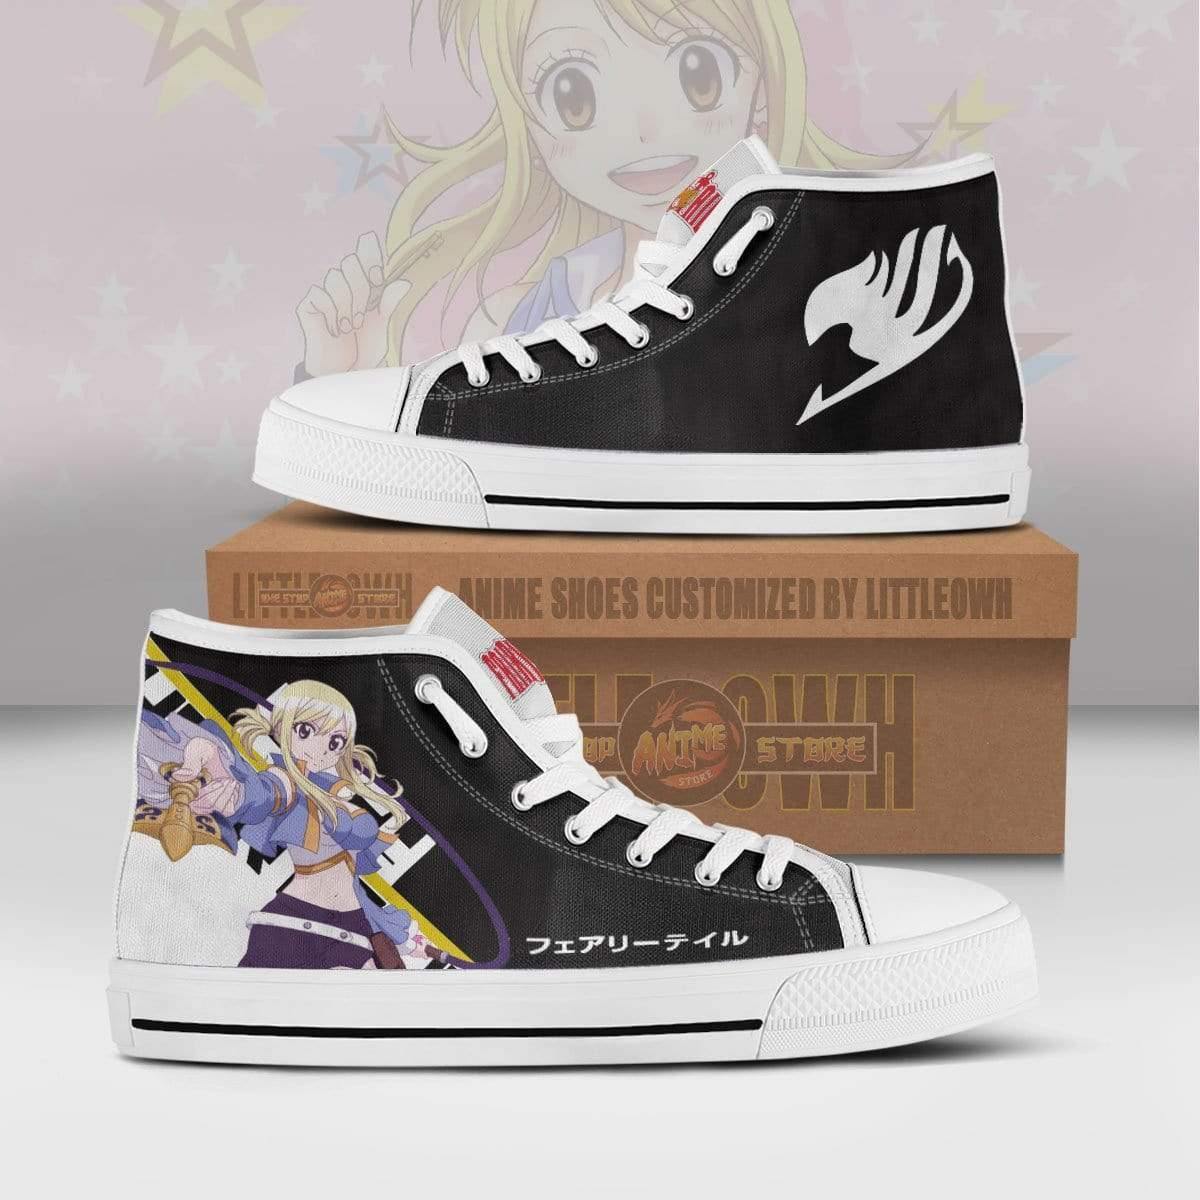 Lucy Heartfilia High Top Canvas Shoes Custom Fairy Tail Anime Sneakers